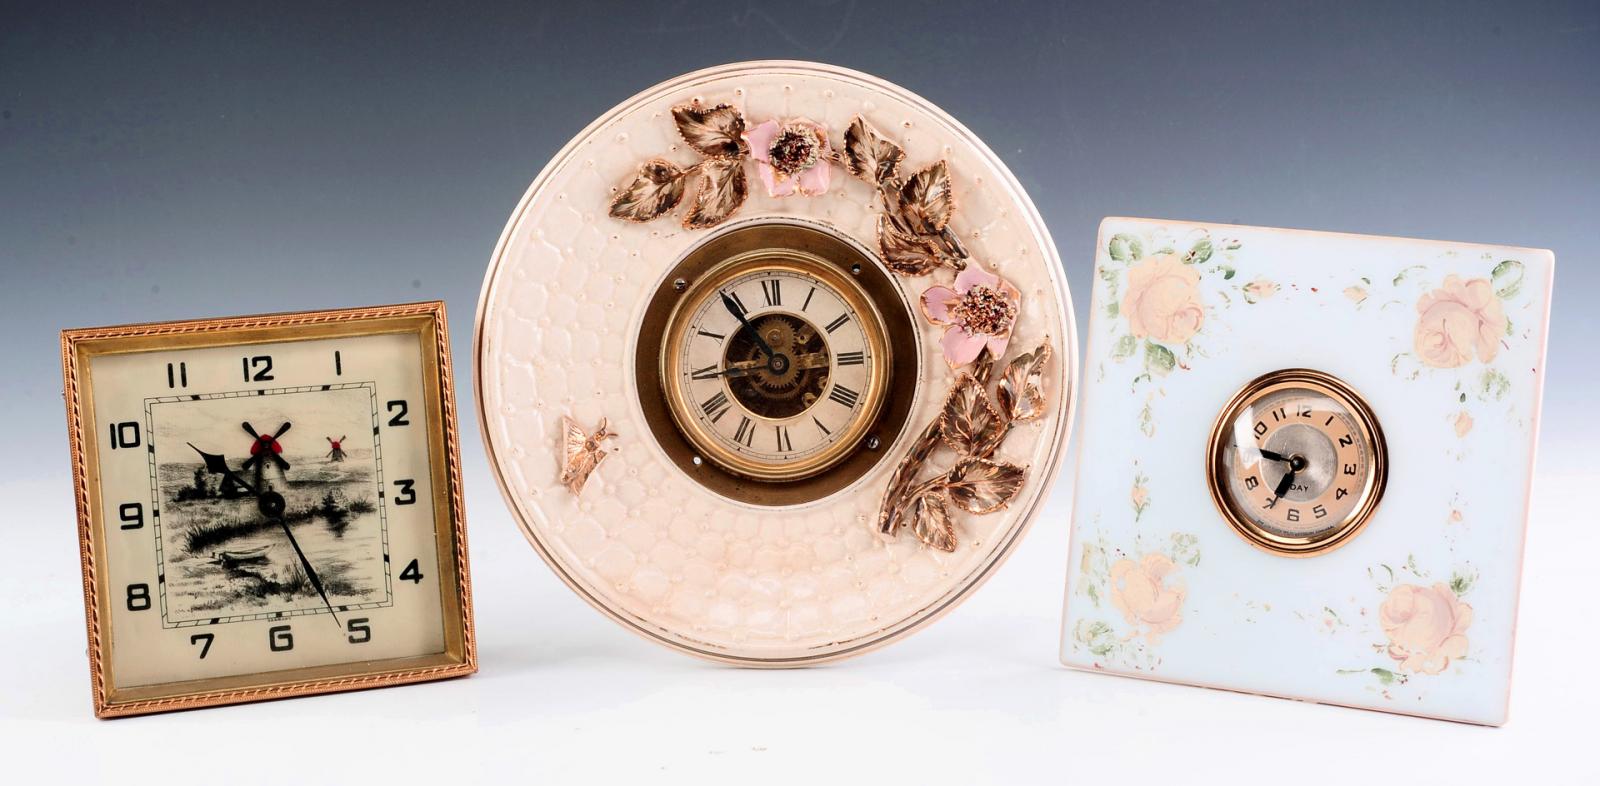 ANTIQUE NOVELTY CLOCKS - ONE WITH ANIMATION - ONE LUX